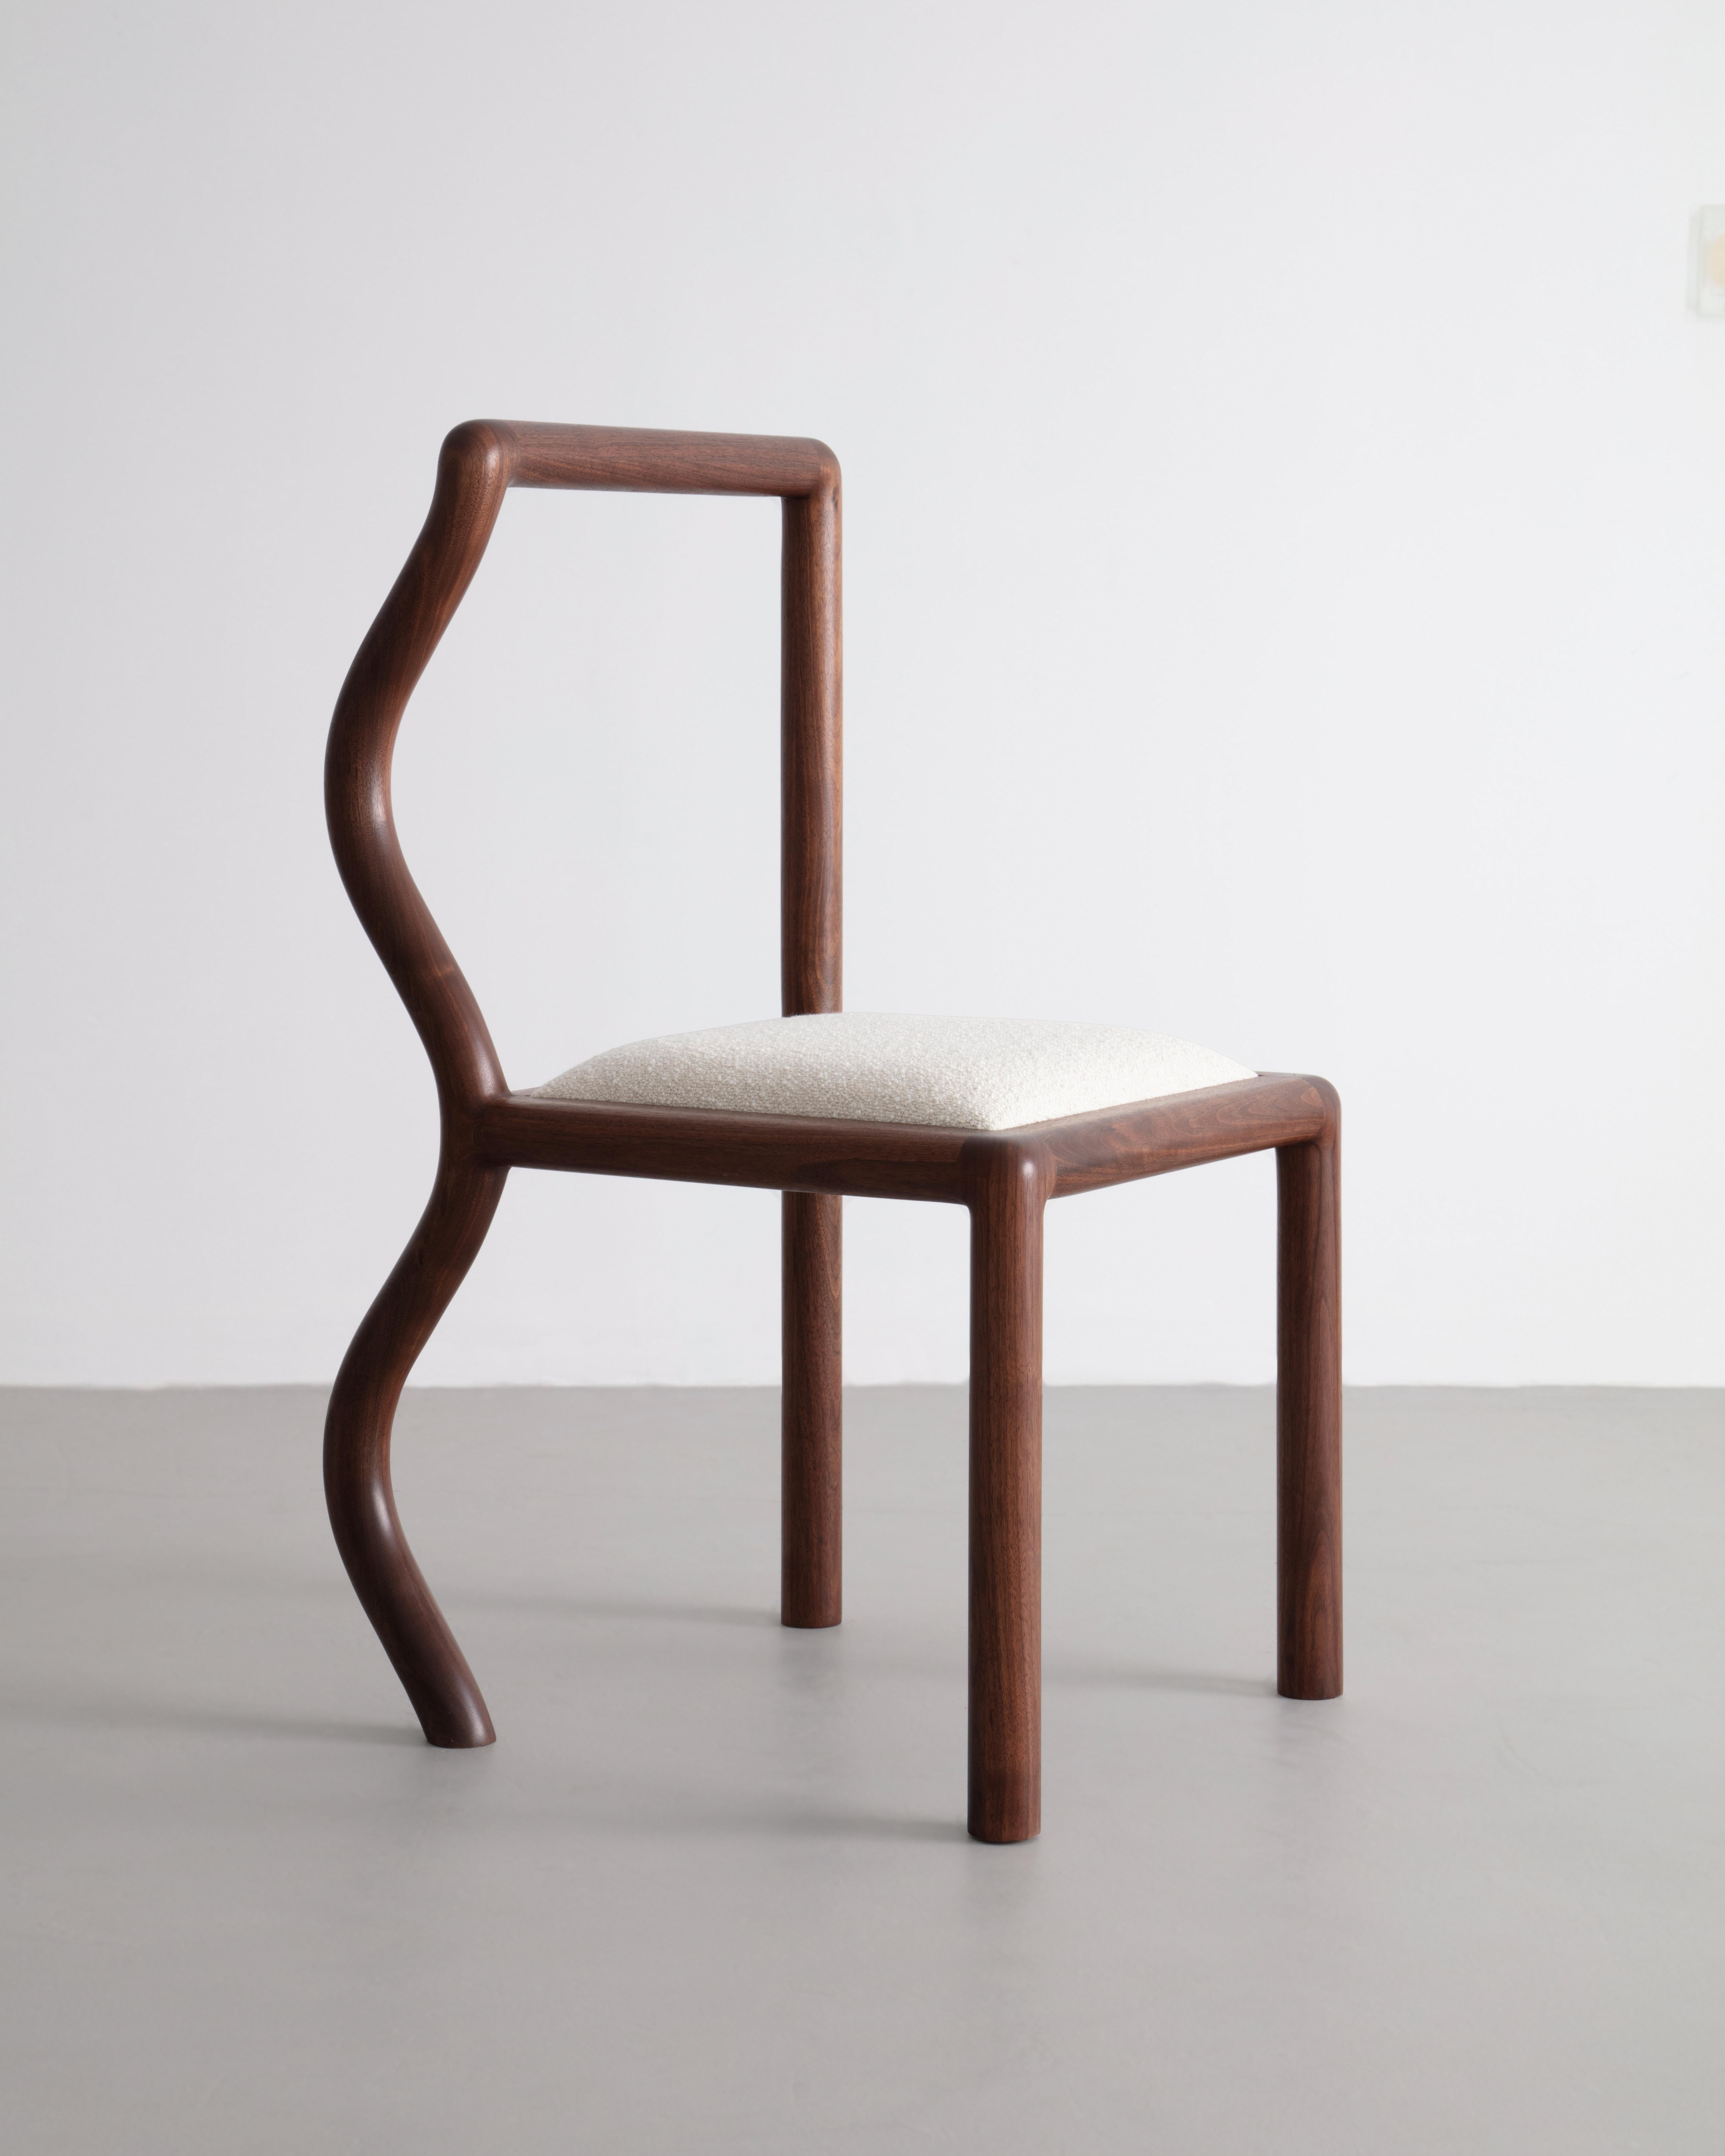 squiggle chair